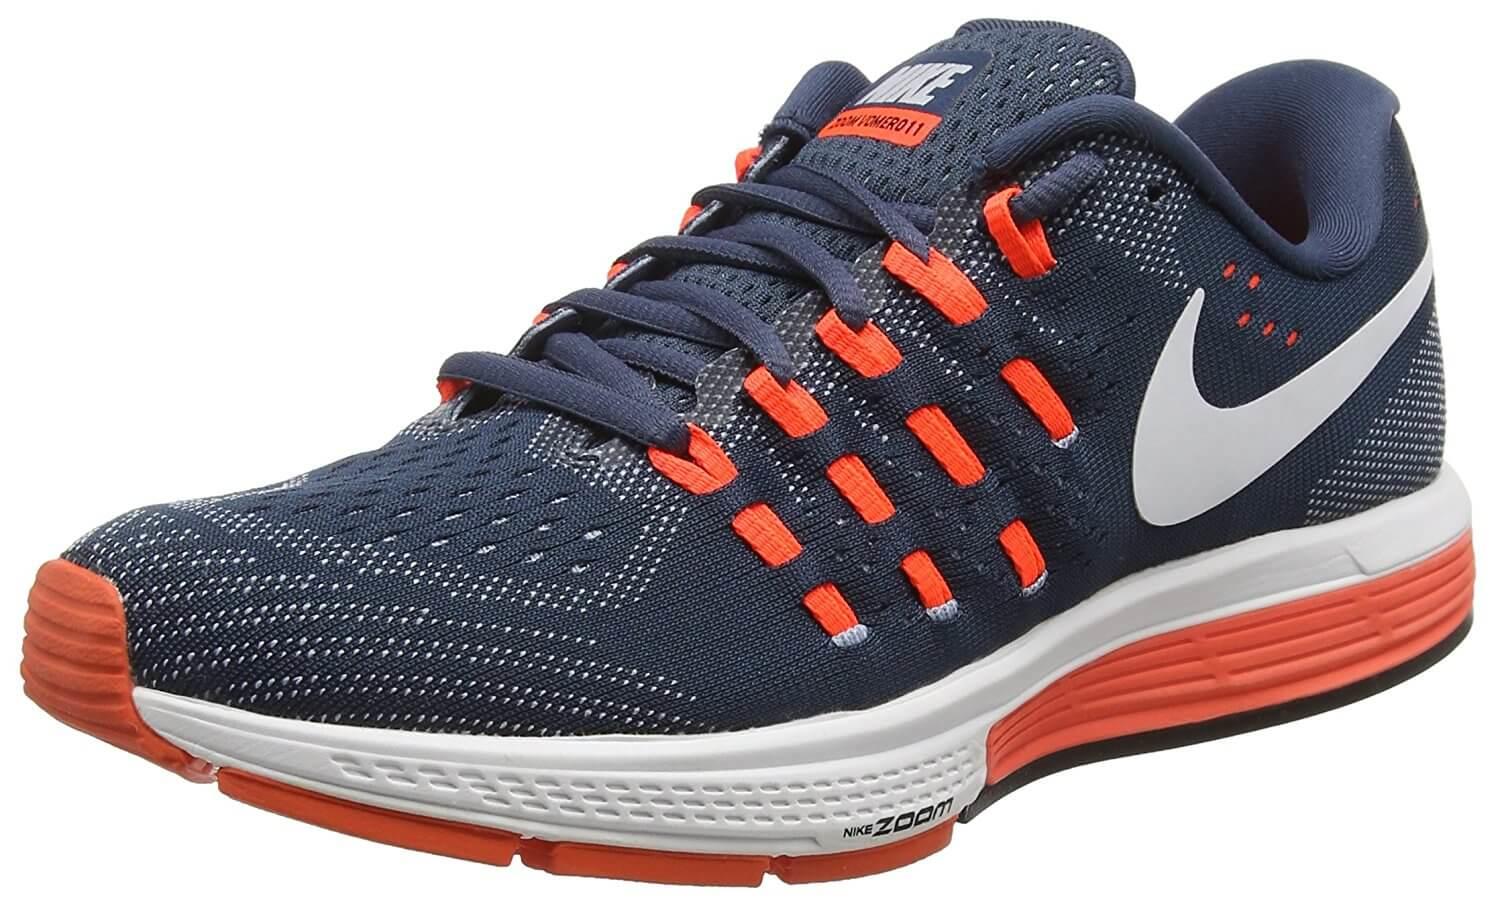 the Nike Air Zoom Vomero 11 is a durable running shoe that will last for many hundreds of miles